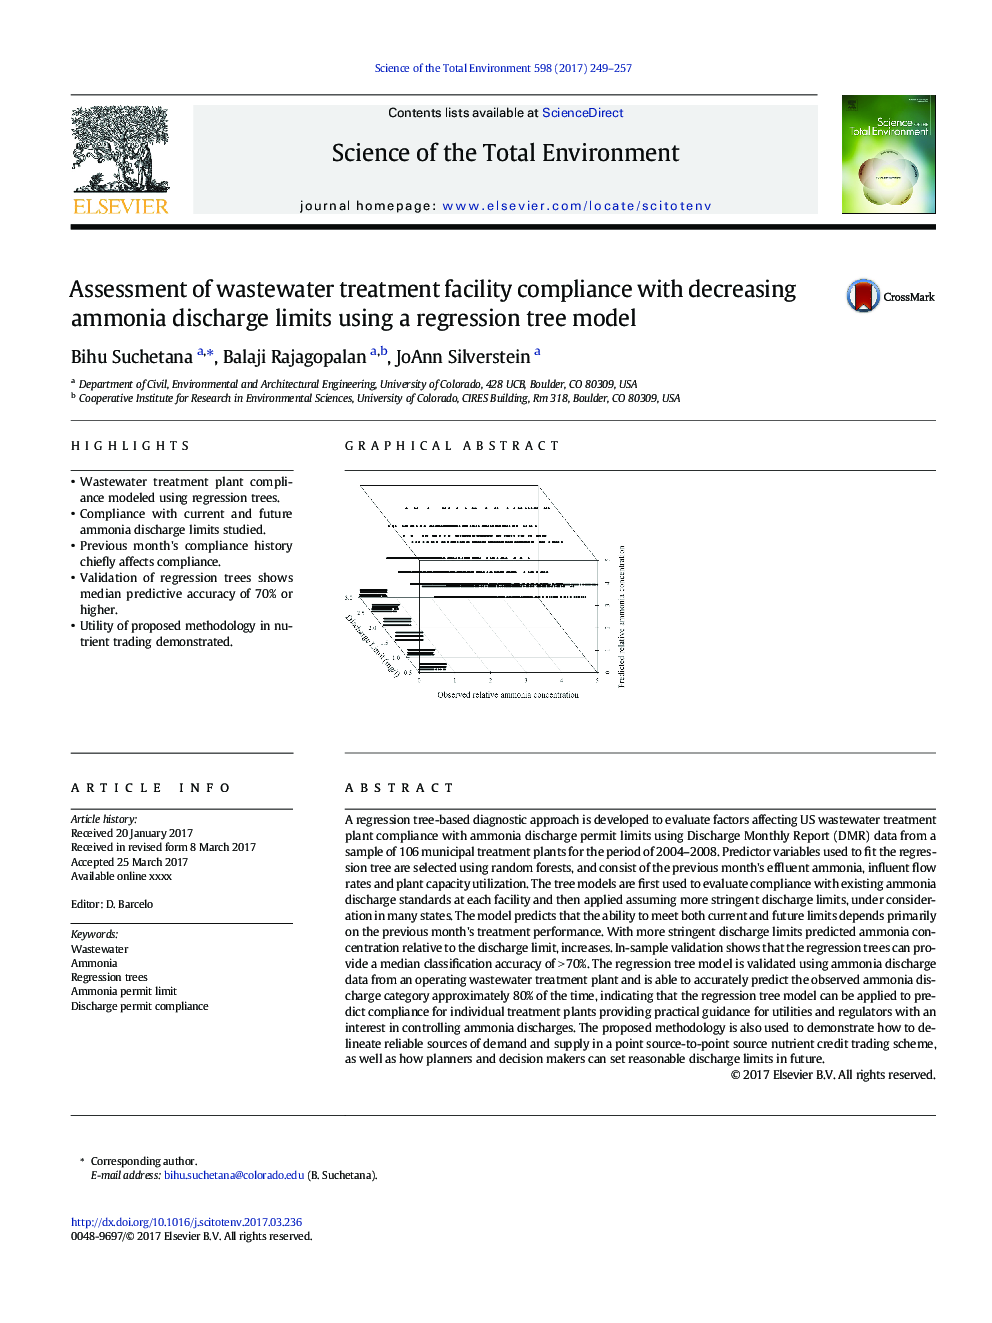 Assessment of wastewater treatment facility compliance with decreasing ammonia discharge limits using a regression tree model